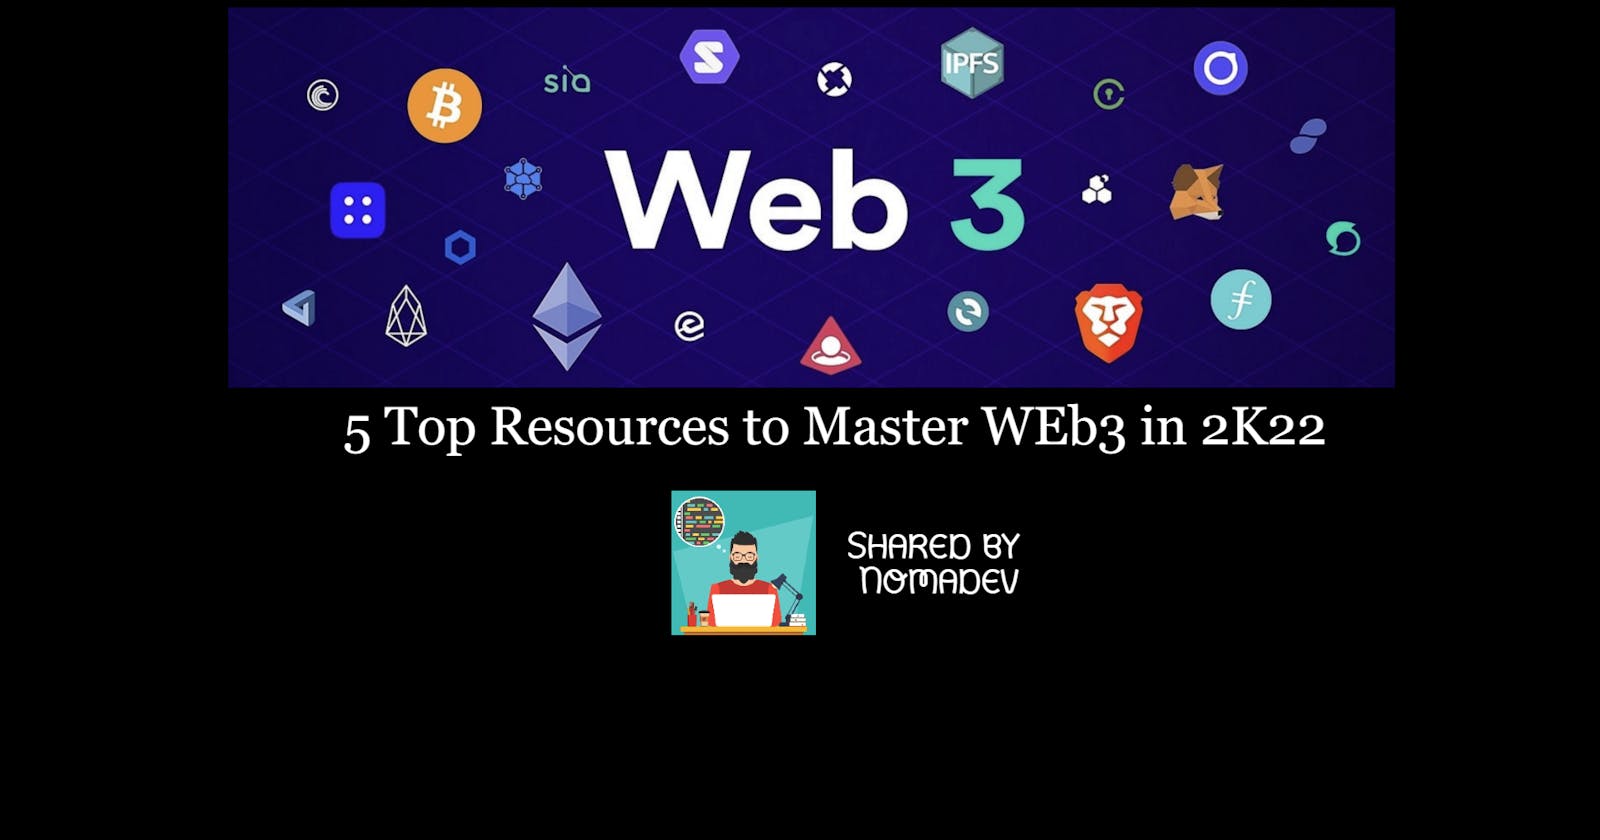 Top 5 Resources to Master Web3 in 2k22